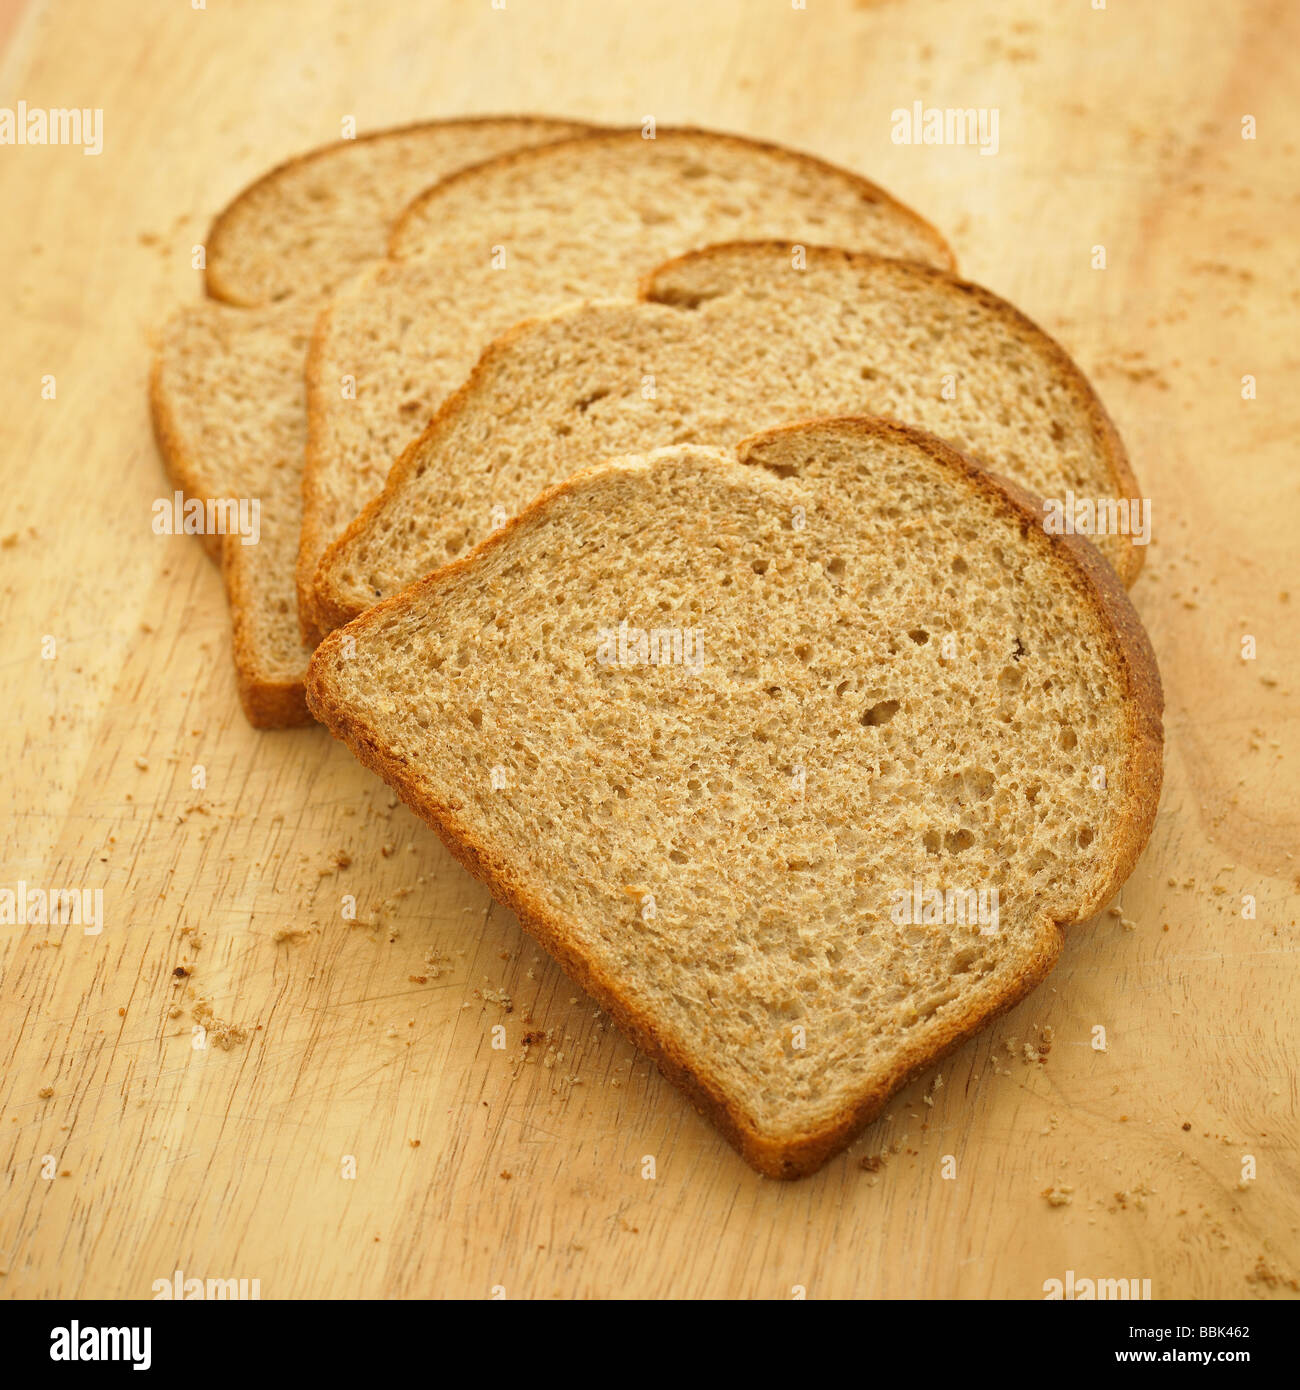 Slices of High in Fibre Wholemeal Brown Bread. Stock Photo